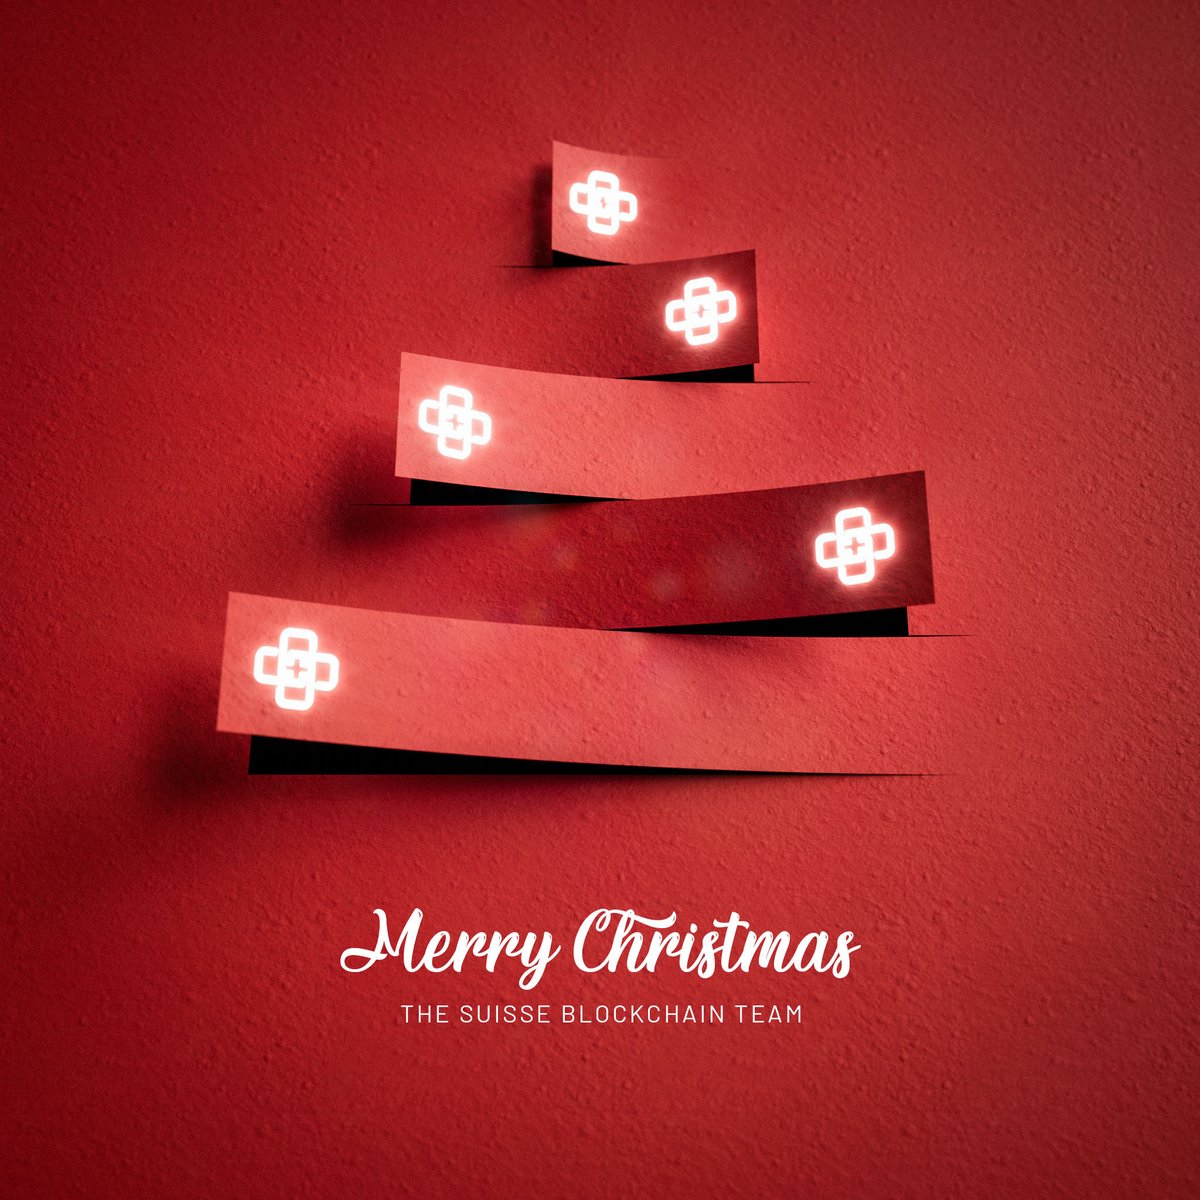 Merry Christmas from the Suisse Blockchain Team! 🎄✨ Thankful for our journey in blockchain and crypto this year. Big thanks to our community and partners. Excited for more innovation and impact in 2024! Happy Holidays and a Prosperous New Year! #Blockchain #NewYear2024